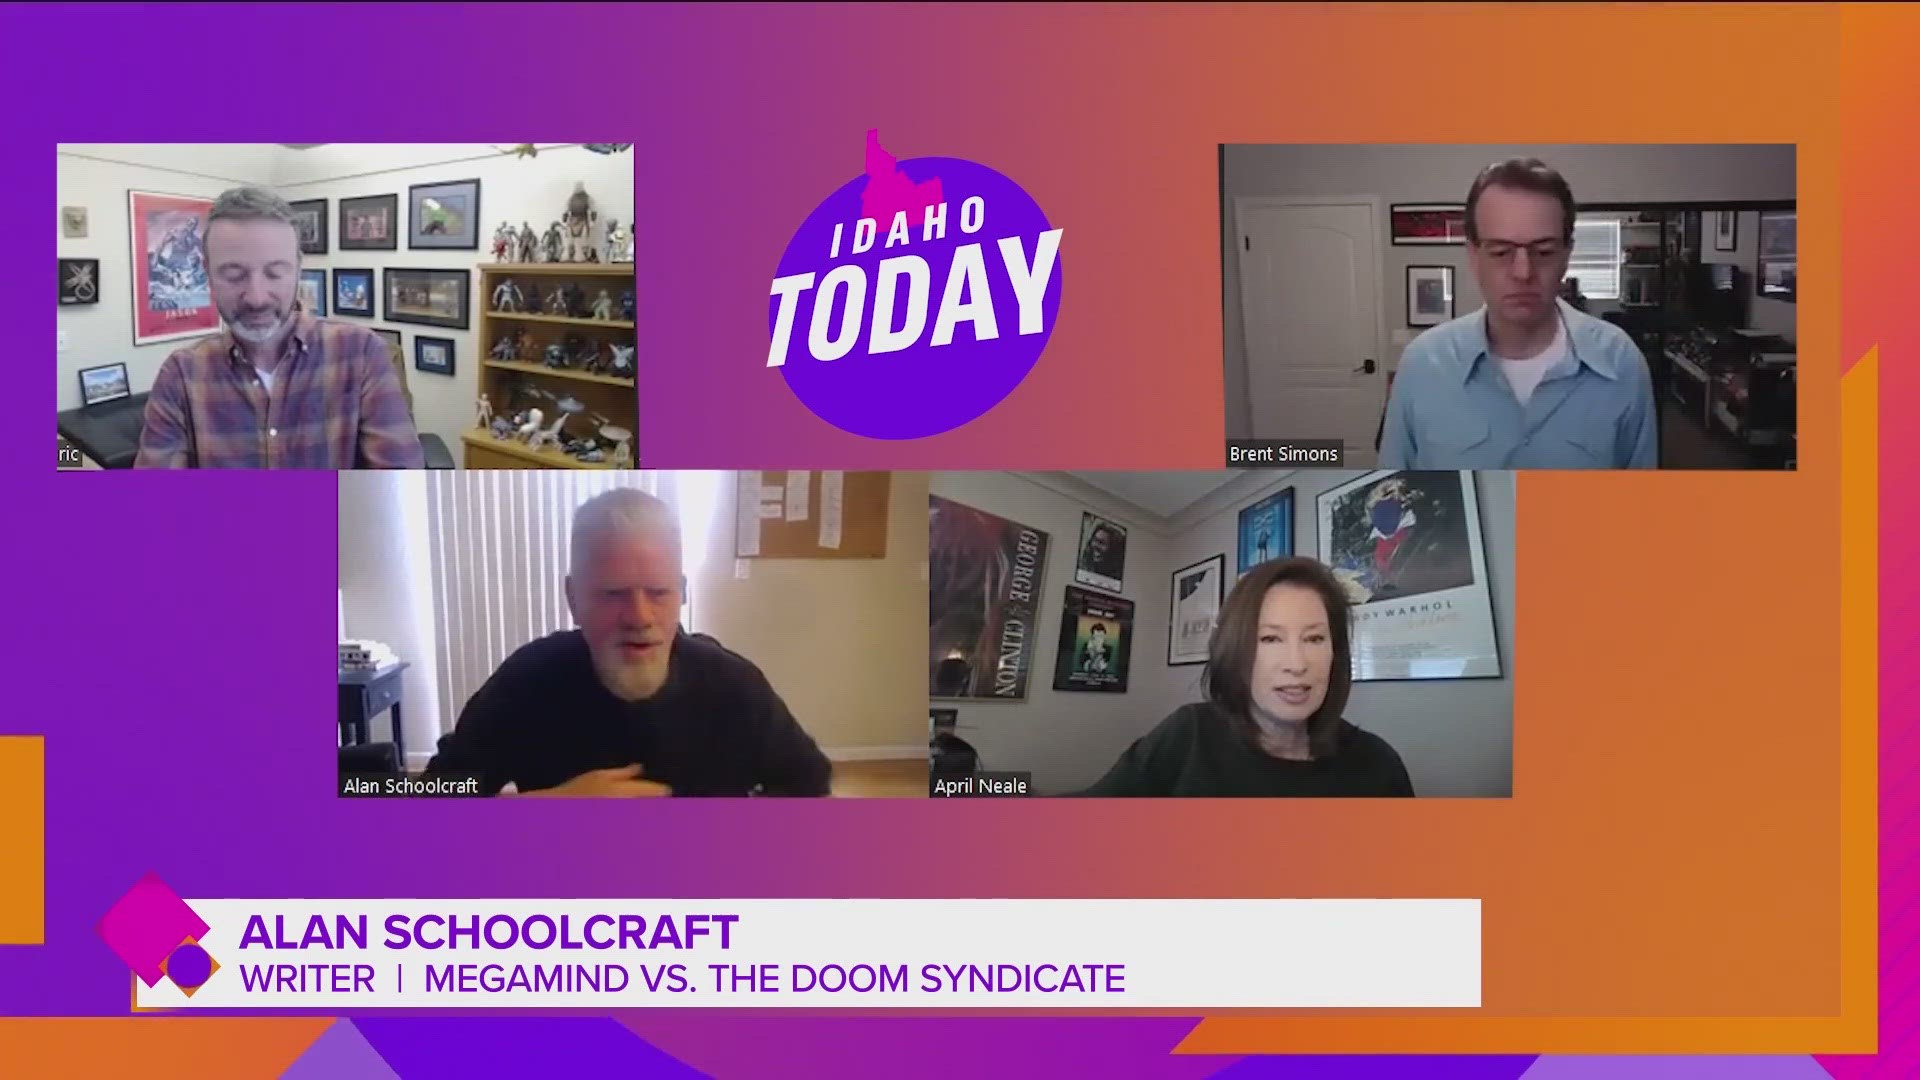 KTVB spoke exclusively with Megamind vs. The Doom Syndicate Executive Producers Eric Fogel, Brent Simons, and Alan Schoolcraft on the Peacock original film and new s